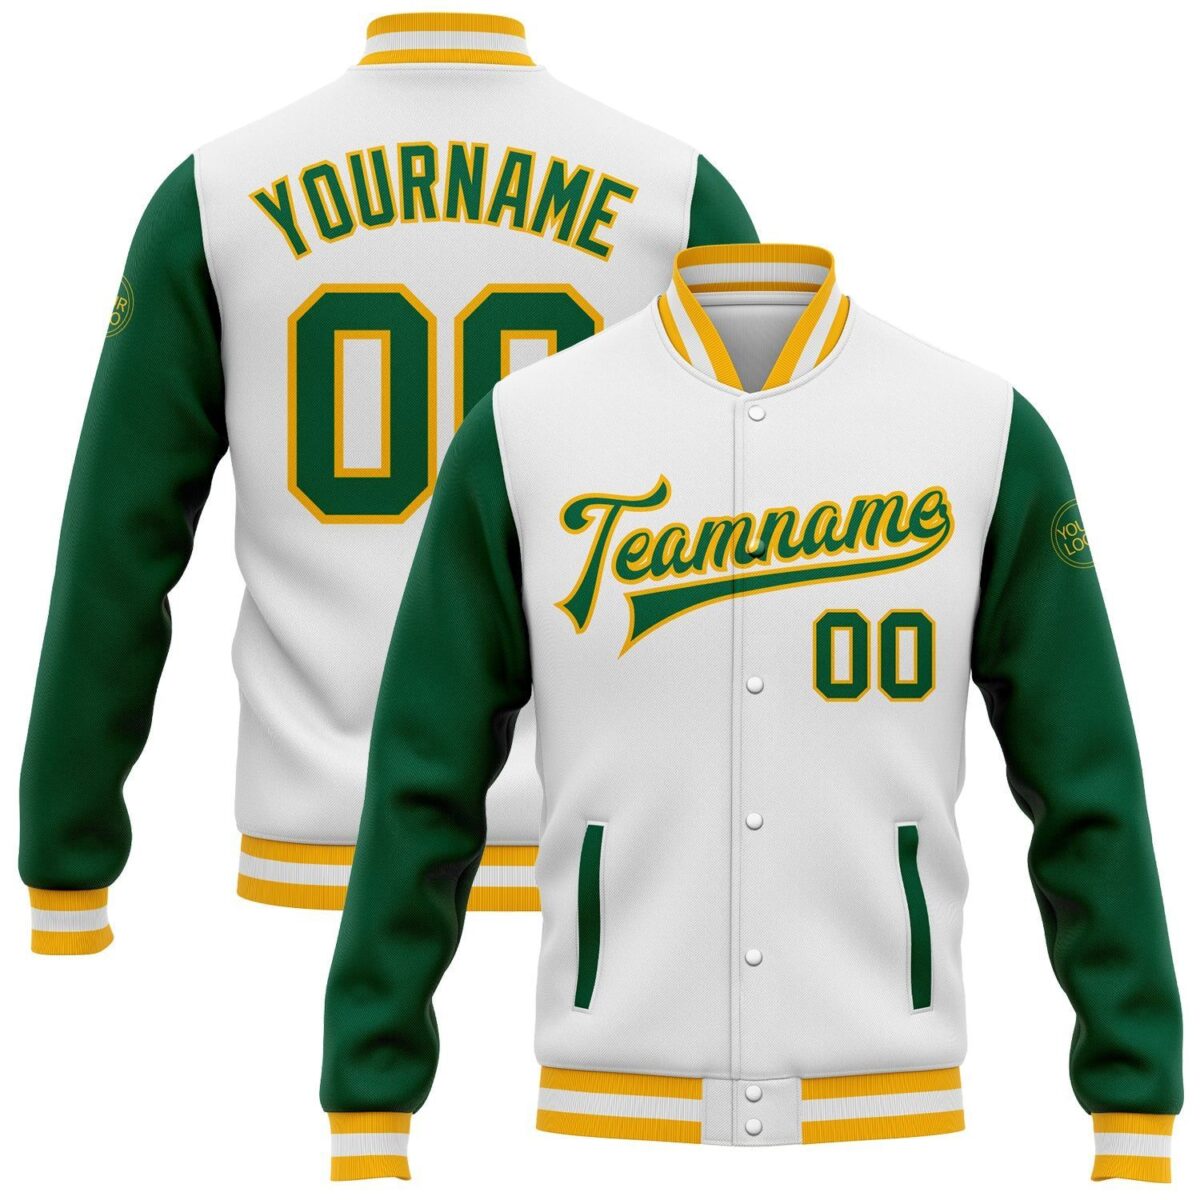 College Student Baseball Jackets with White & Green 1